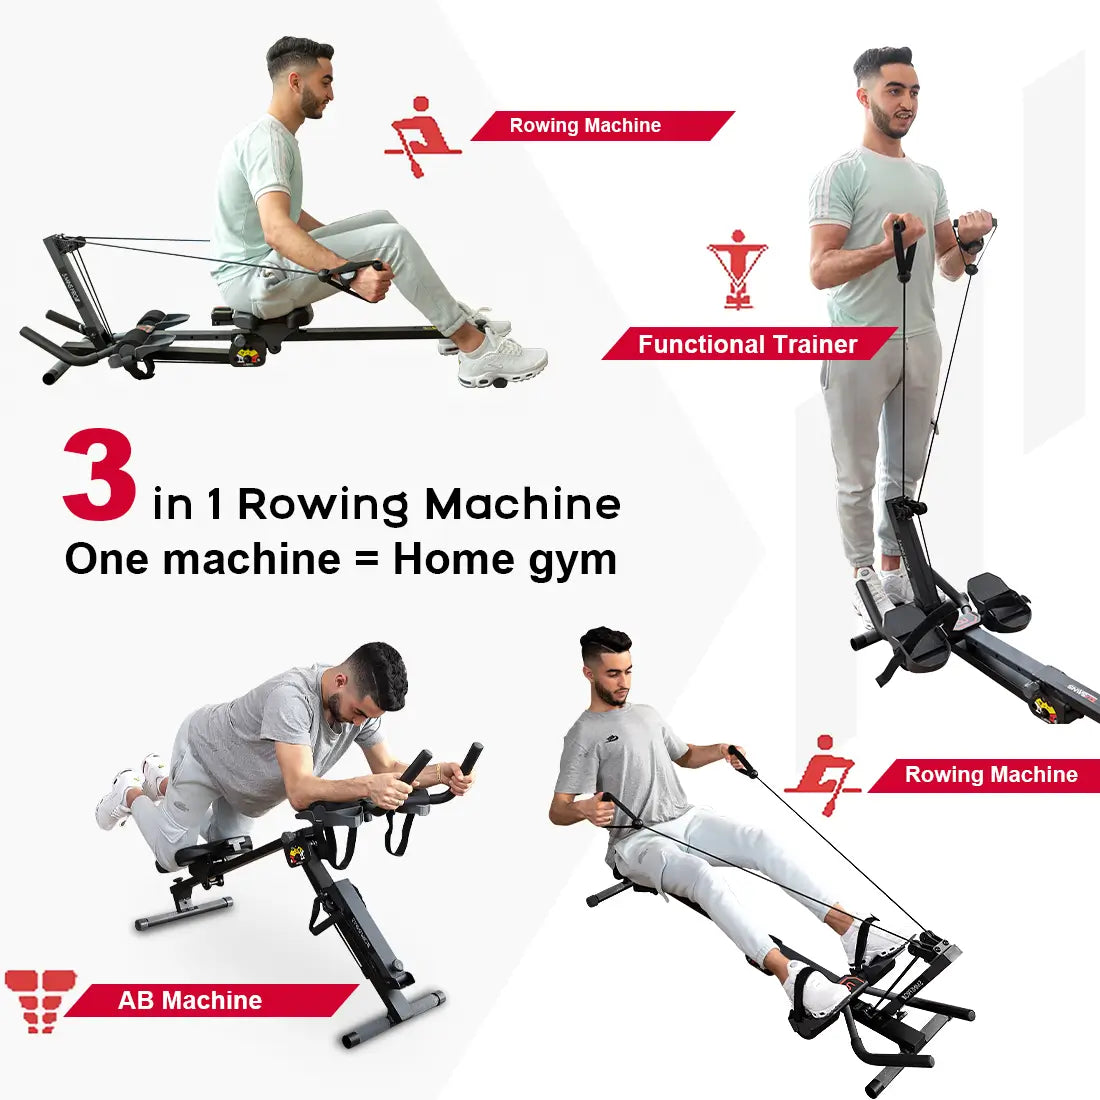 Tousains 3 in 1 rowing machine with three modes